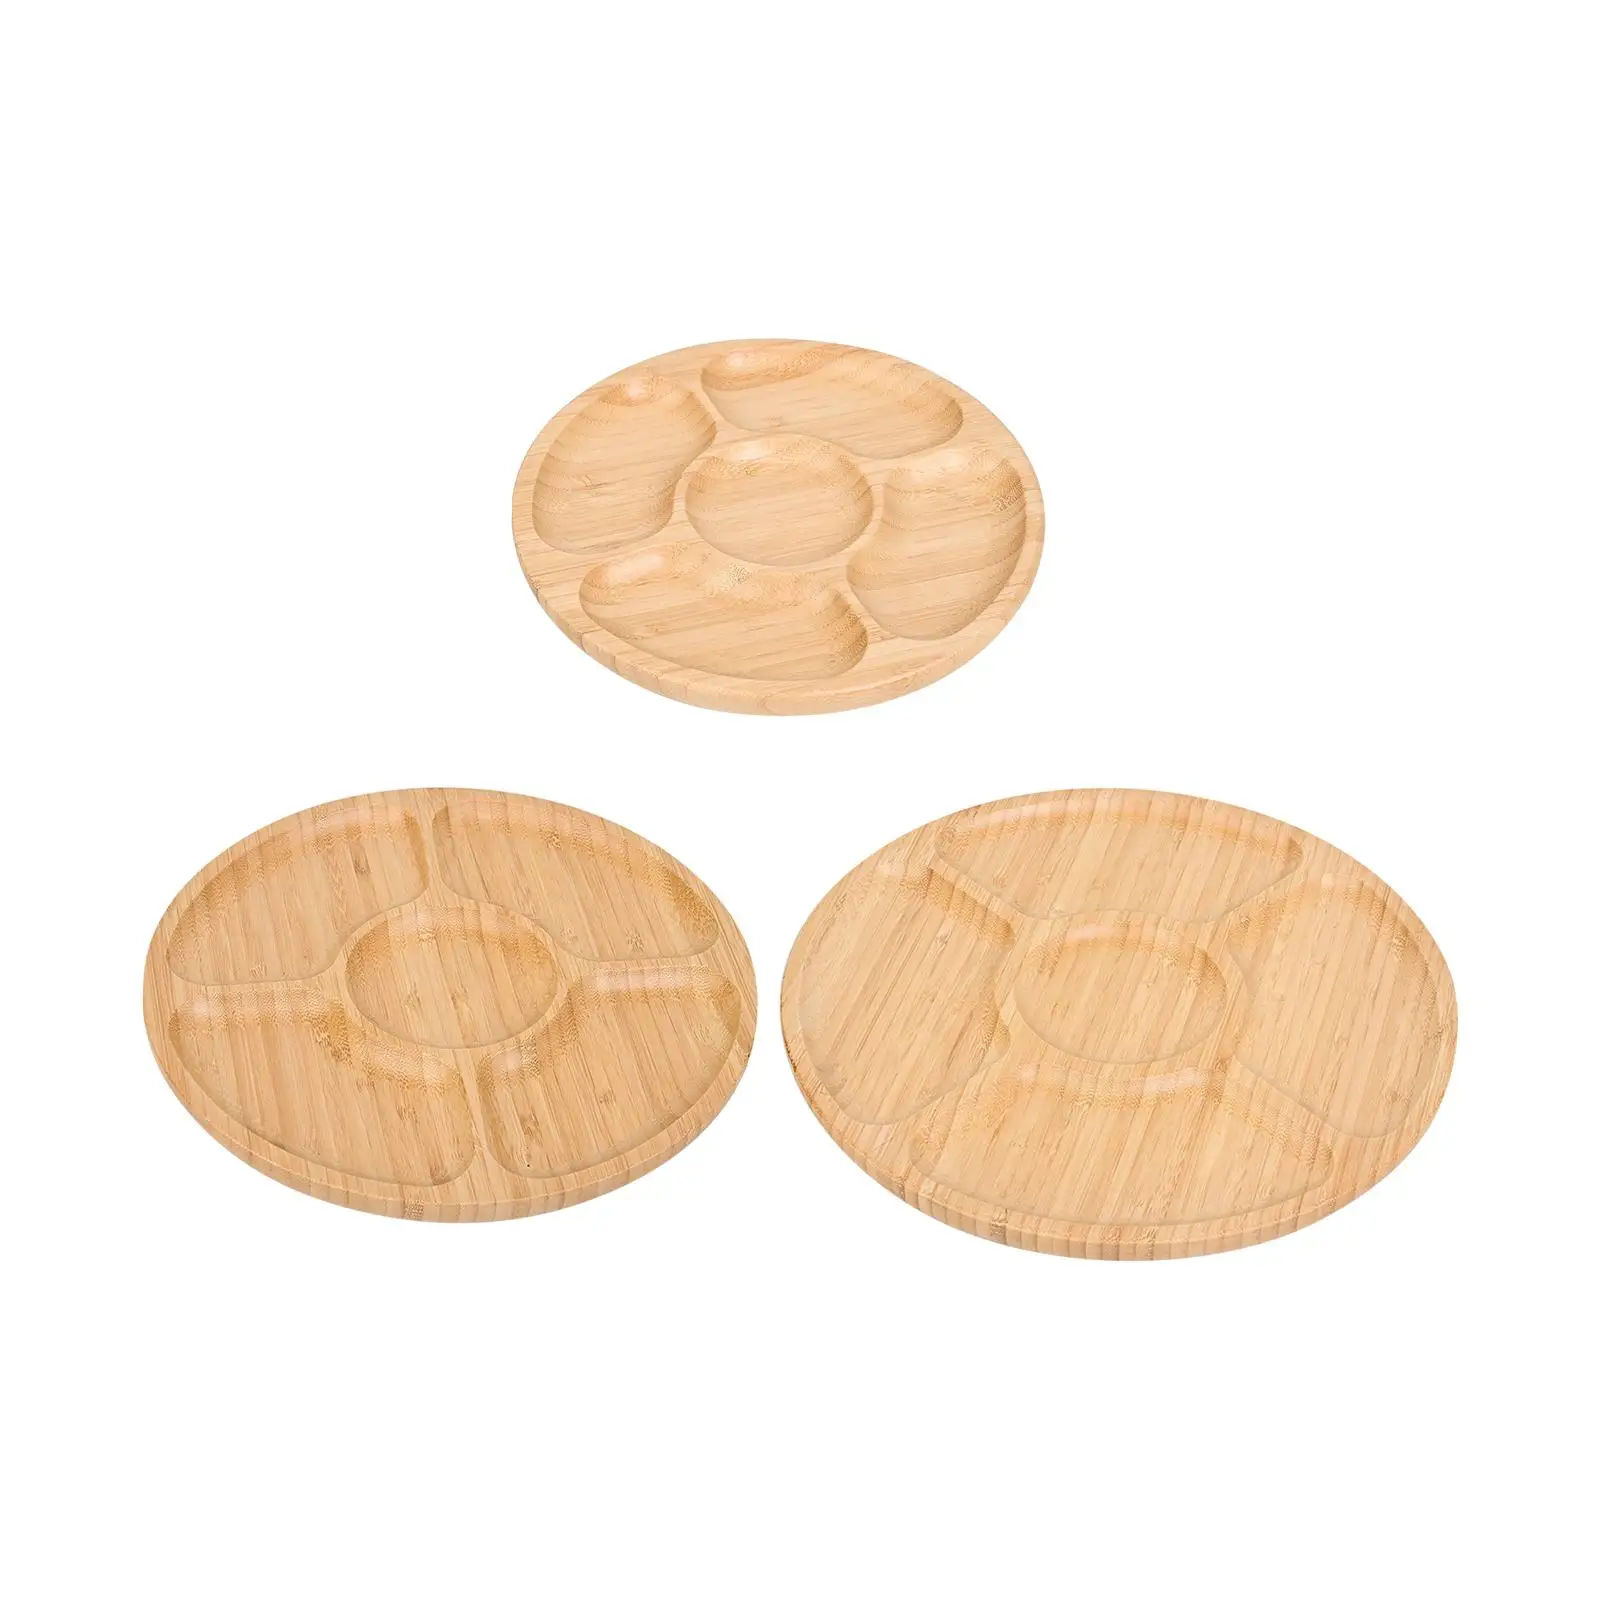 Wooden Tray Decorative Family Dinner Dessert Trays Wooden Tea Trays Round Wood Tray for Cheese Candies Dinner Vegetable